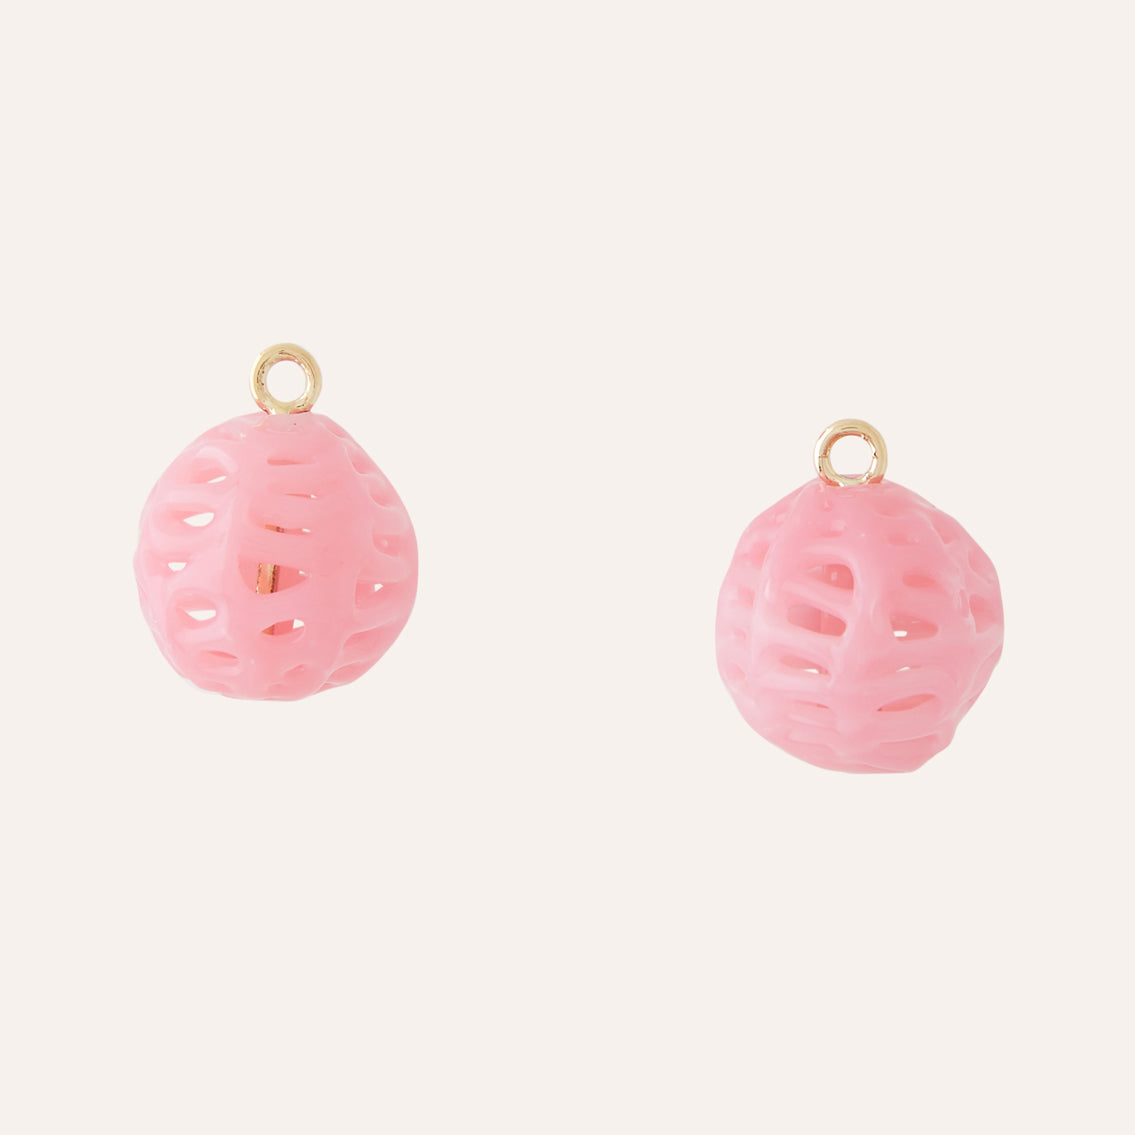 Vintage Pink Glass Earring Drops